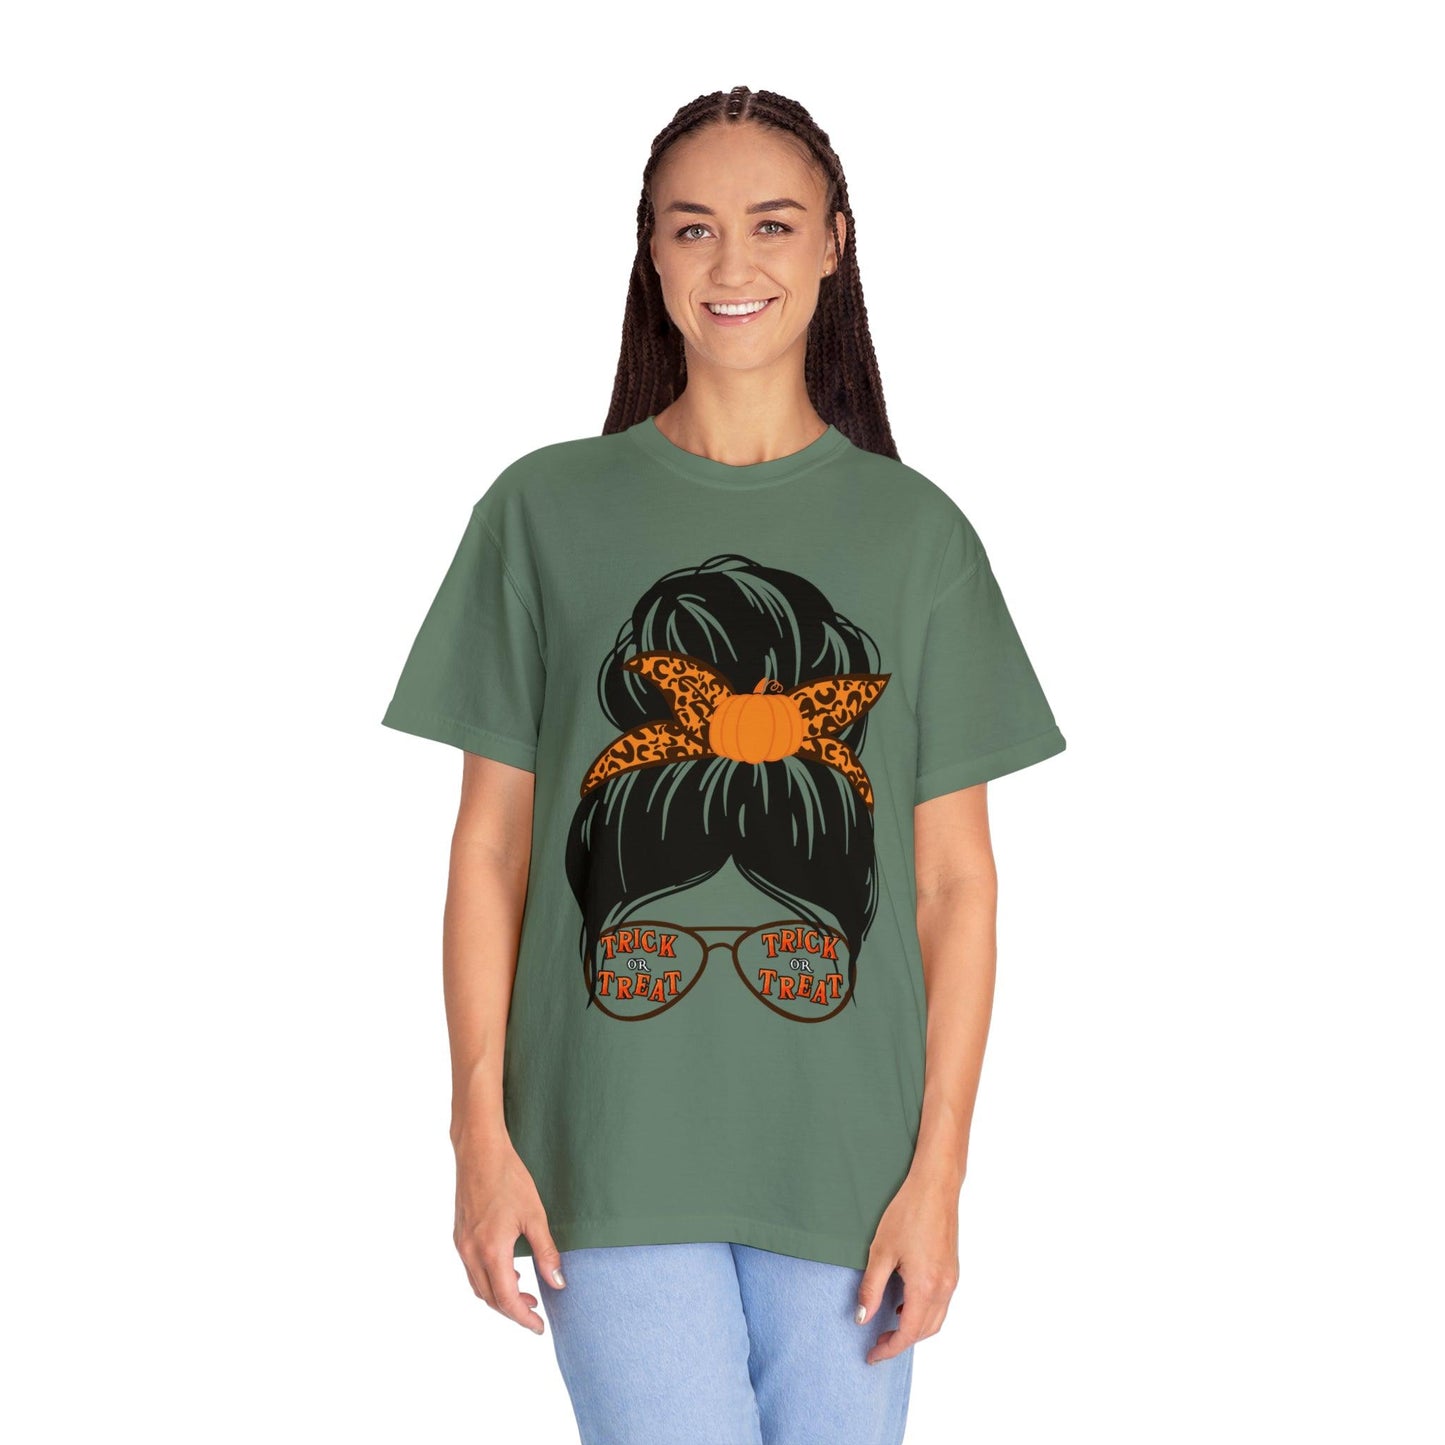 Mom Halloween Party Outfit Trick or Treat Shirt Vintage Shirt Halloween Costume Cute Spooky Shirt, Halloween Gift Halloween T-shirt Trick or Treat Outfit